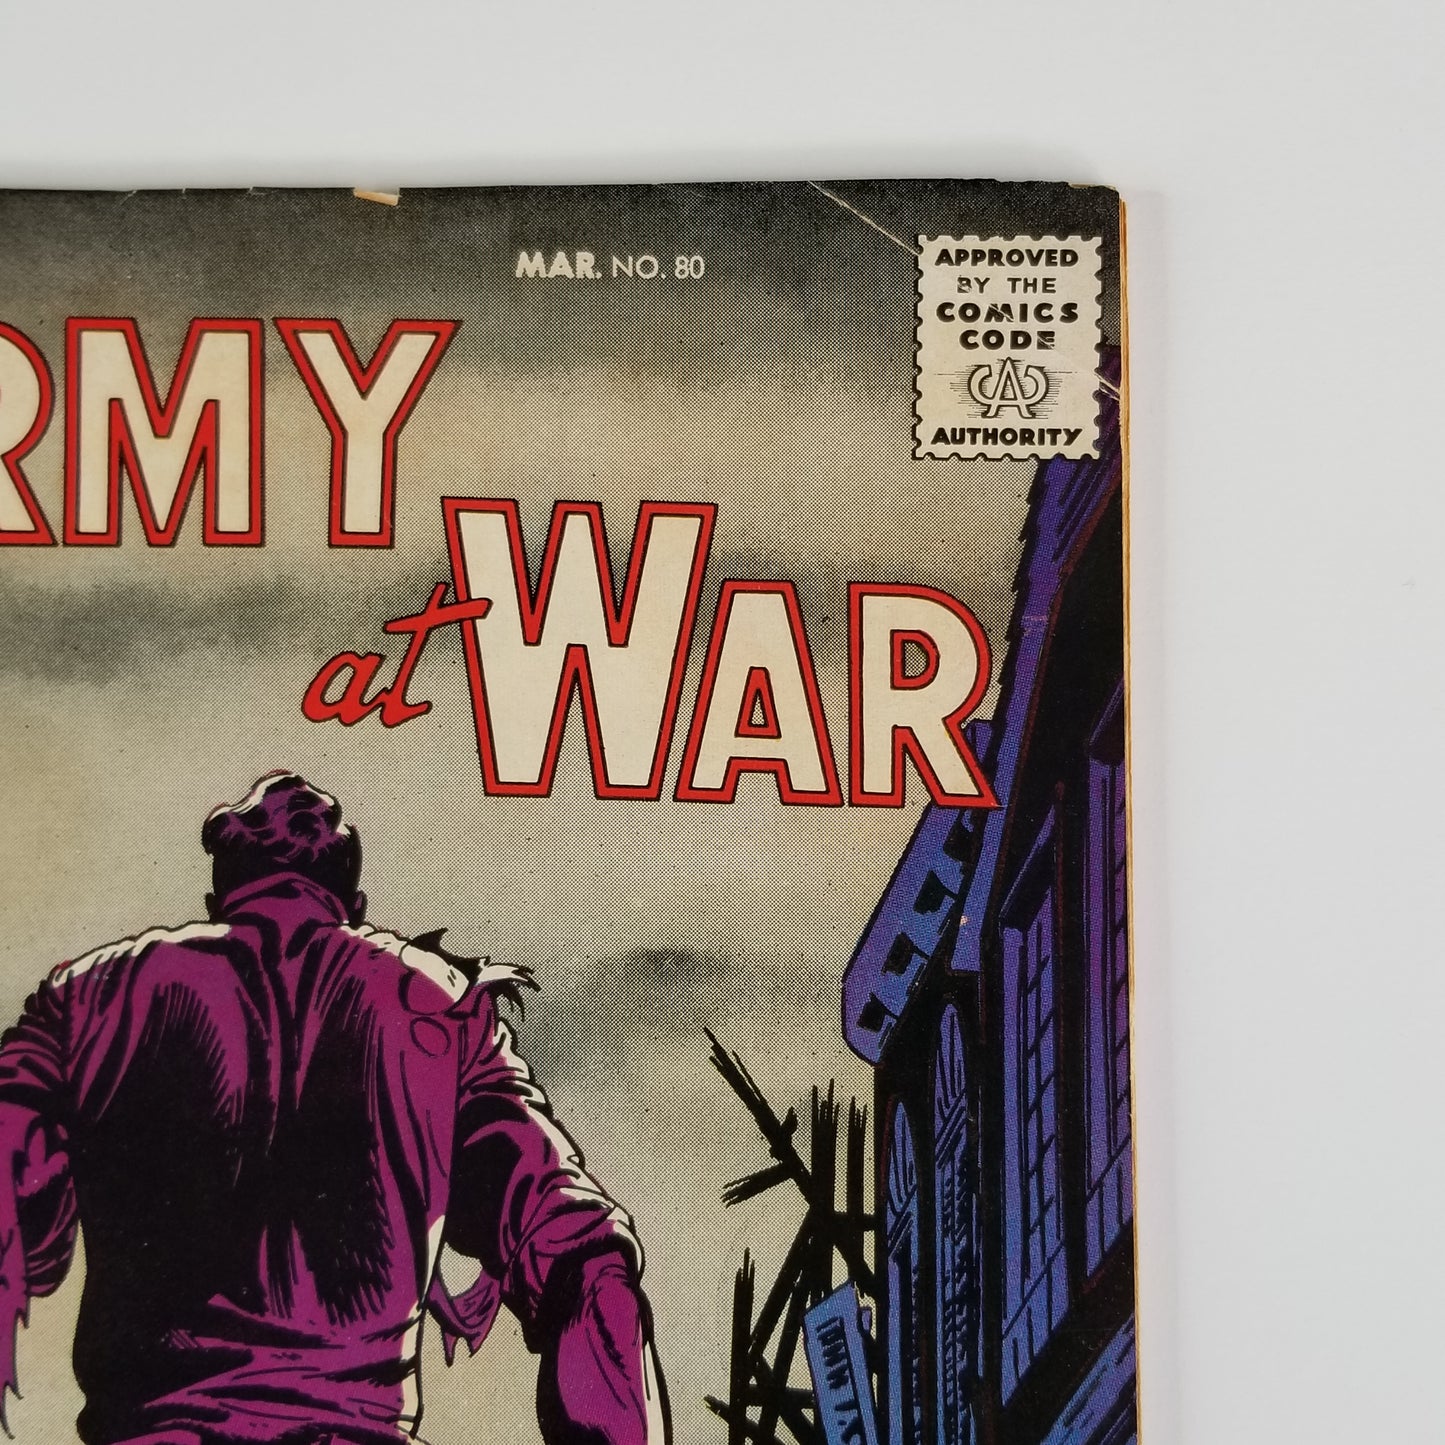 Our Army at War (DC, 1952) #80